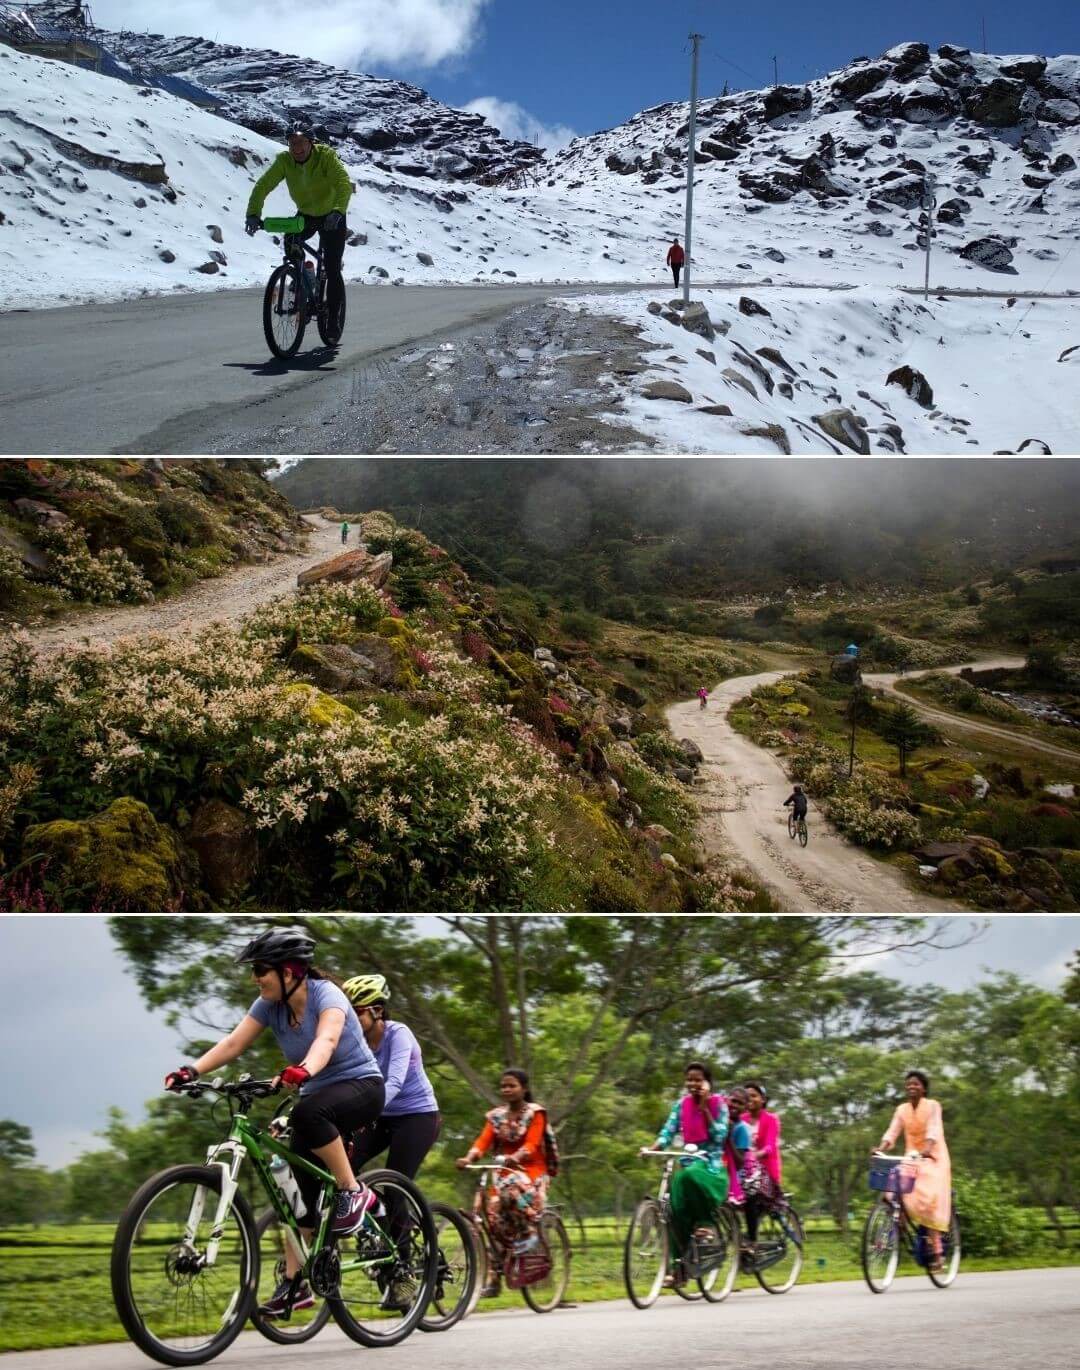 Three images with cyclists, one in high altitudes with snow, the other on scenic mountains full of flowers and the last one with local cyclists 